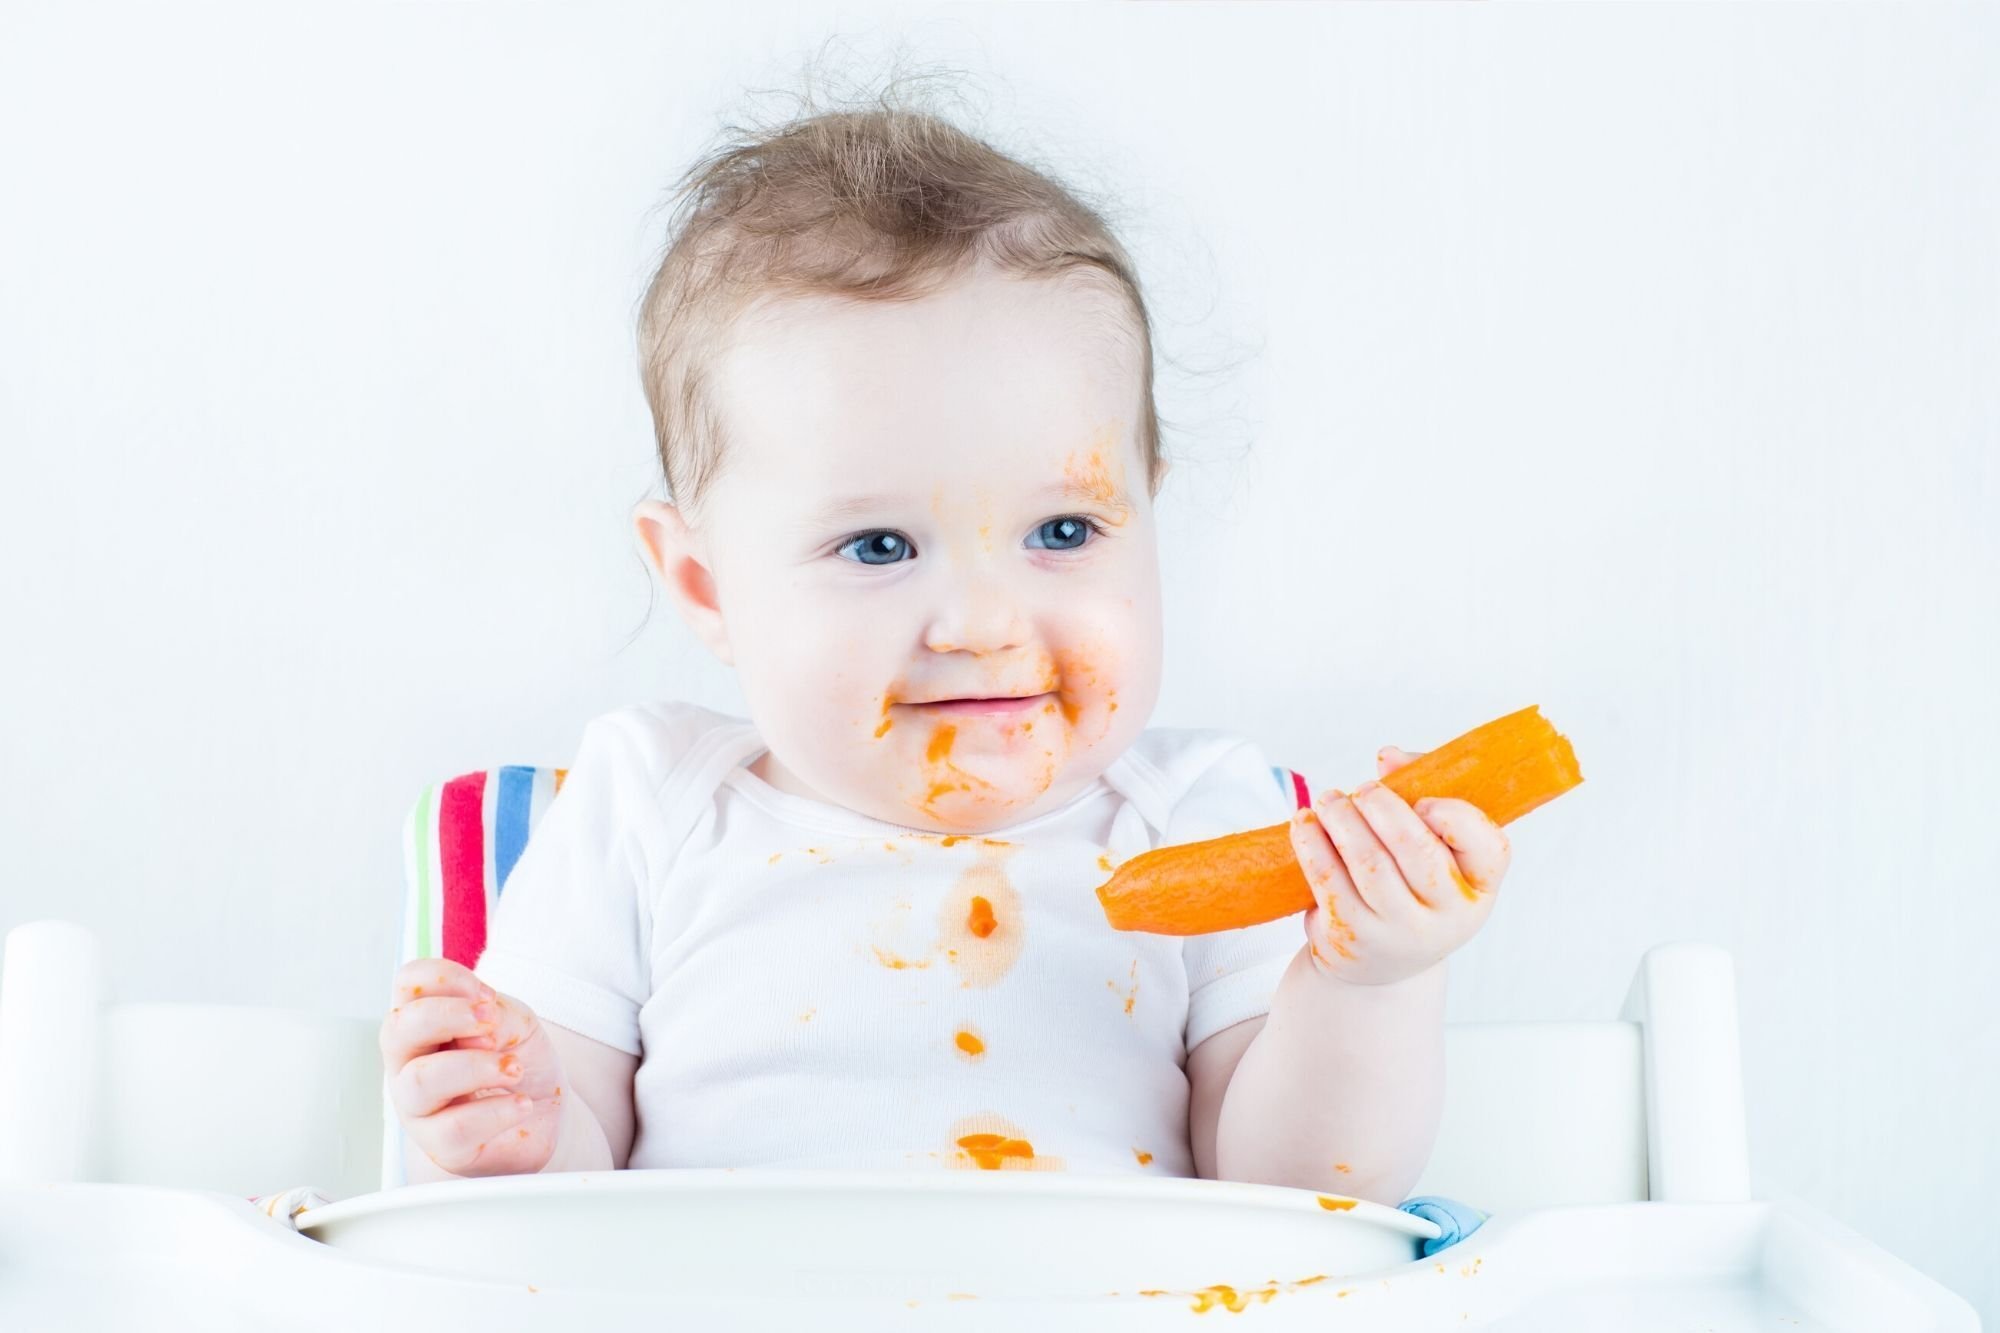 Toddler holding a soft carrot, with a food stained face and vest